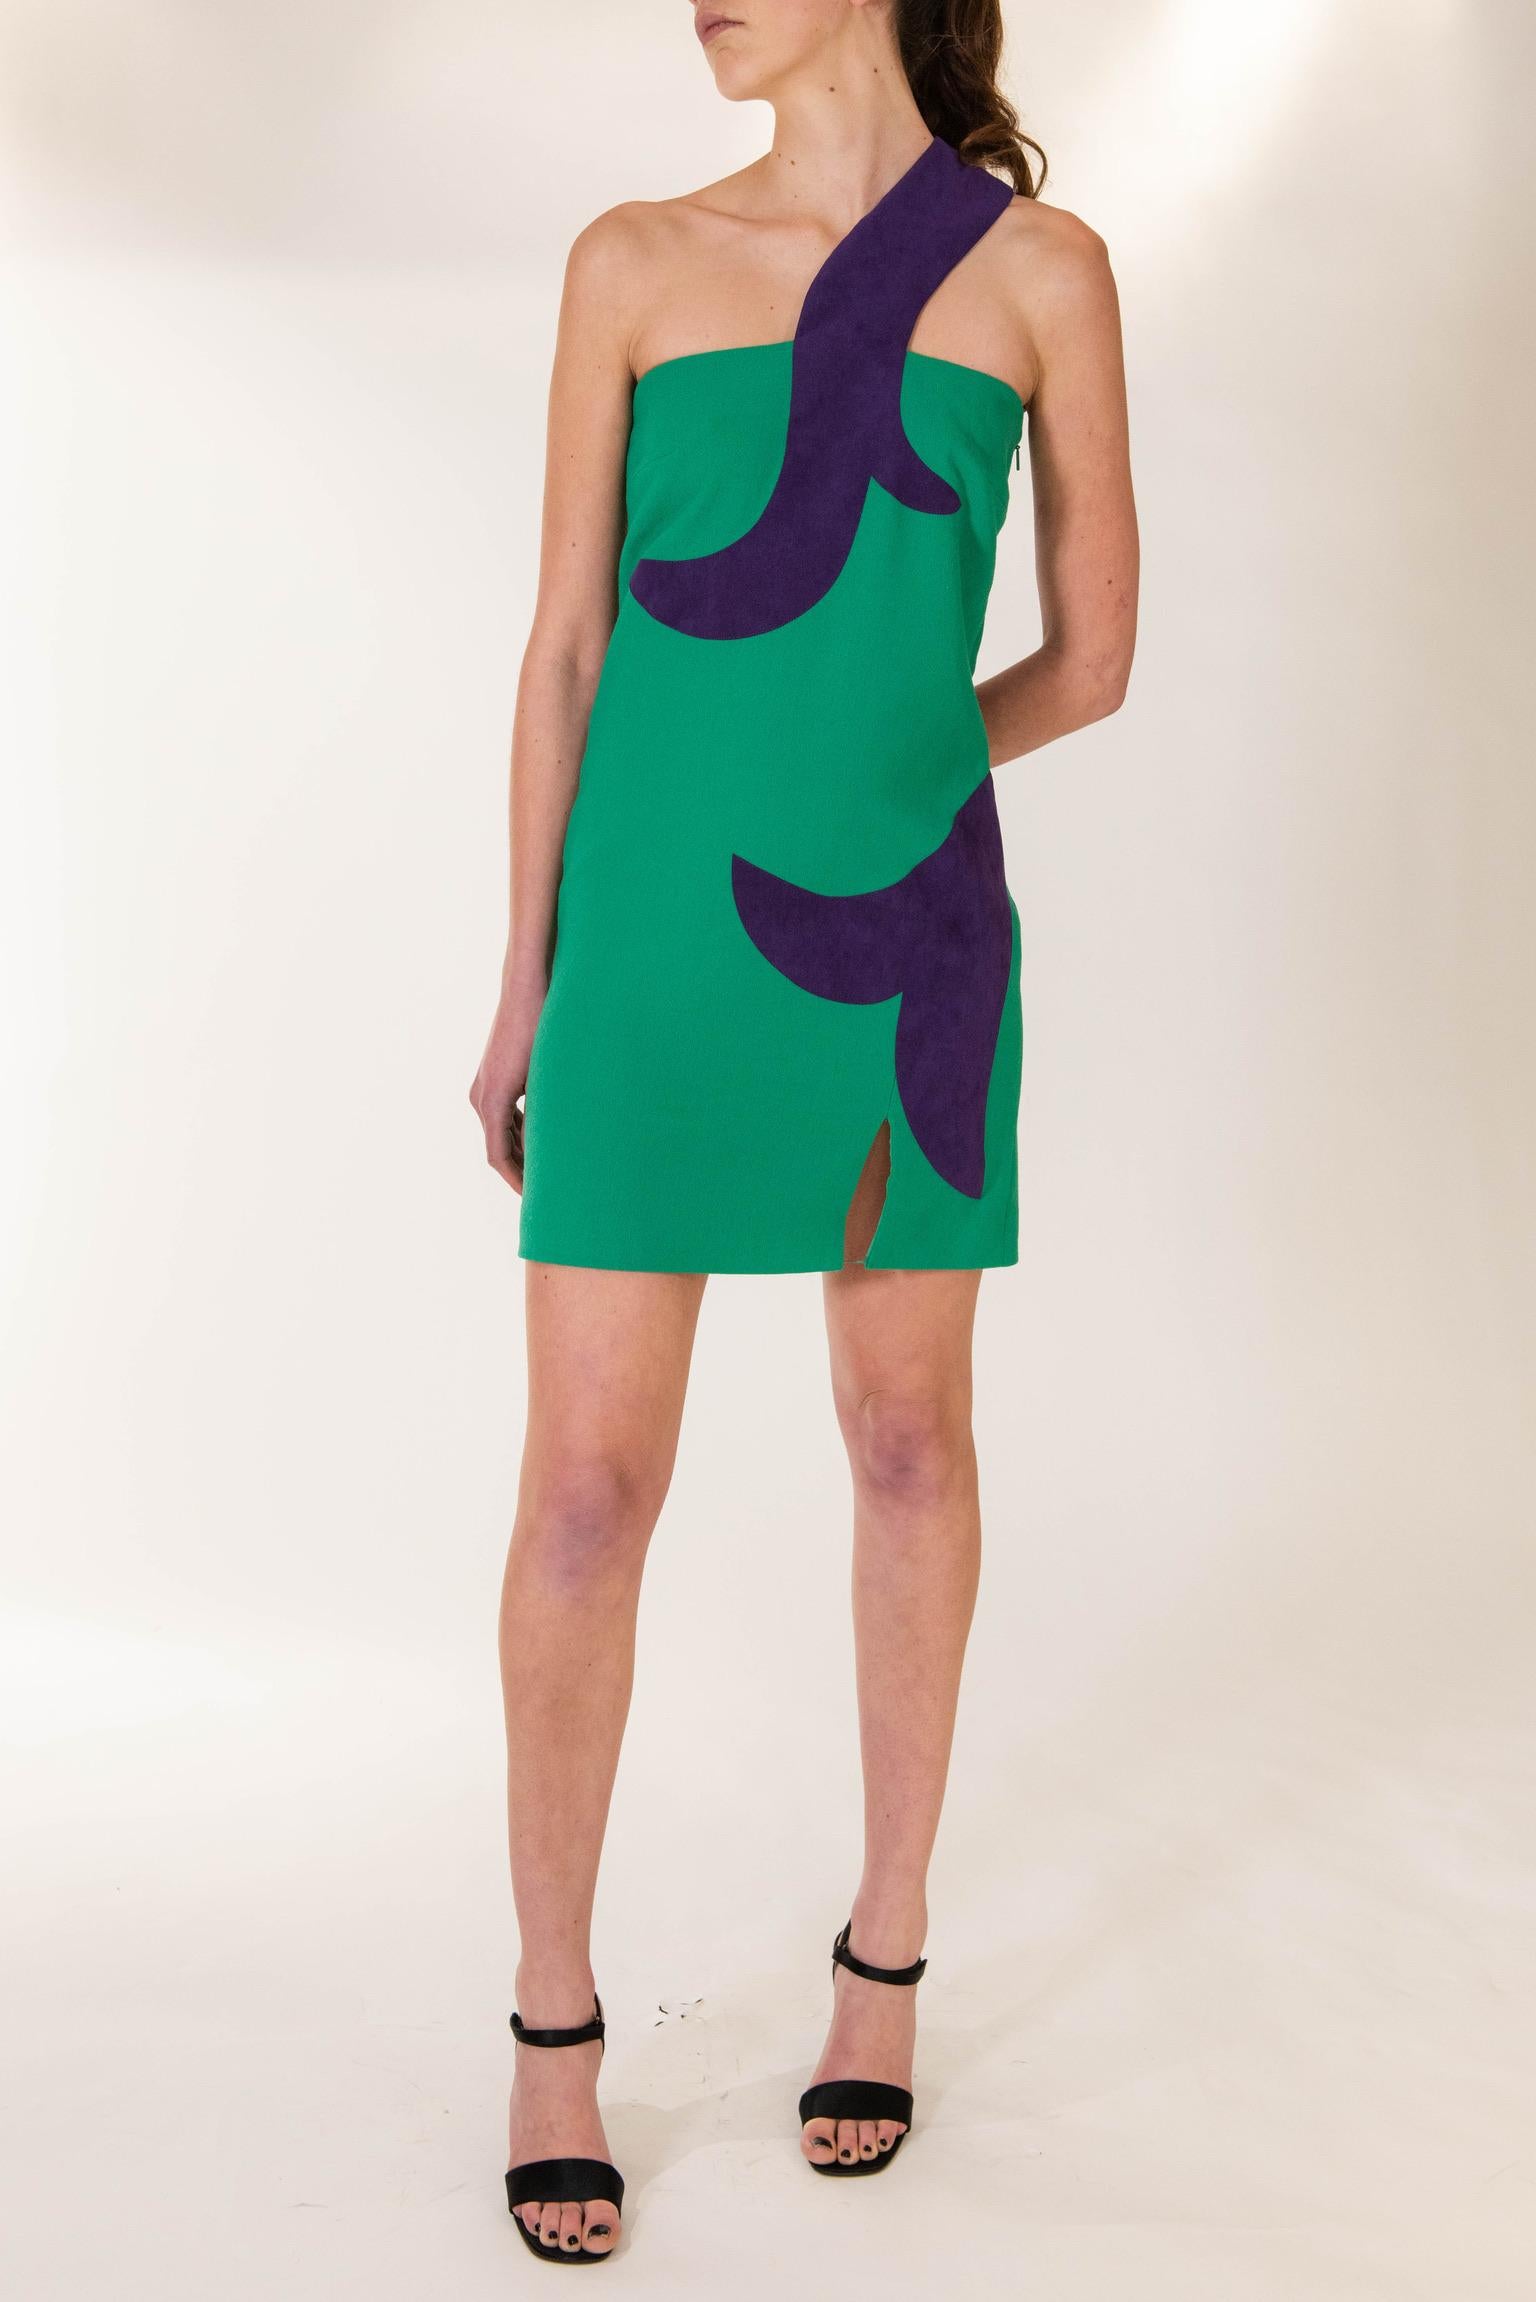 Versace Green and Purple Minidress For Sale 5